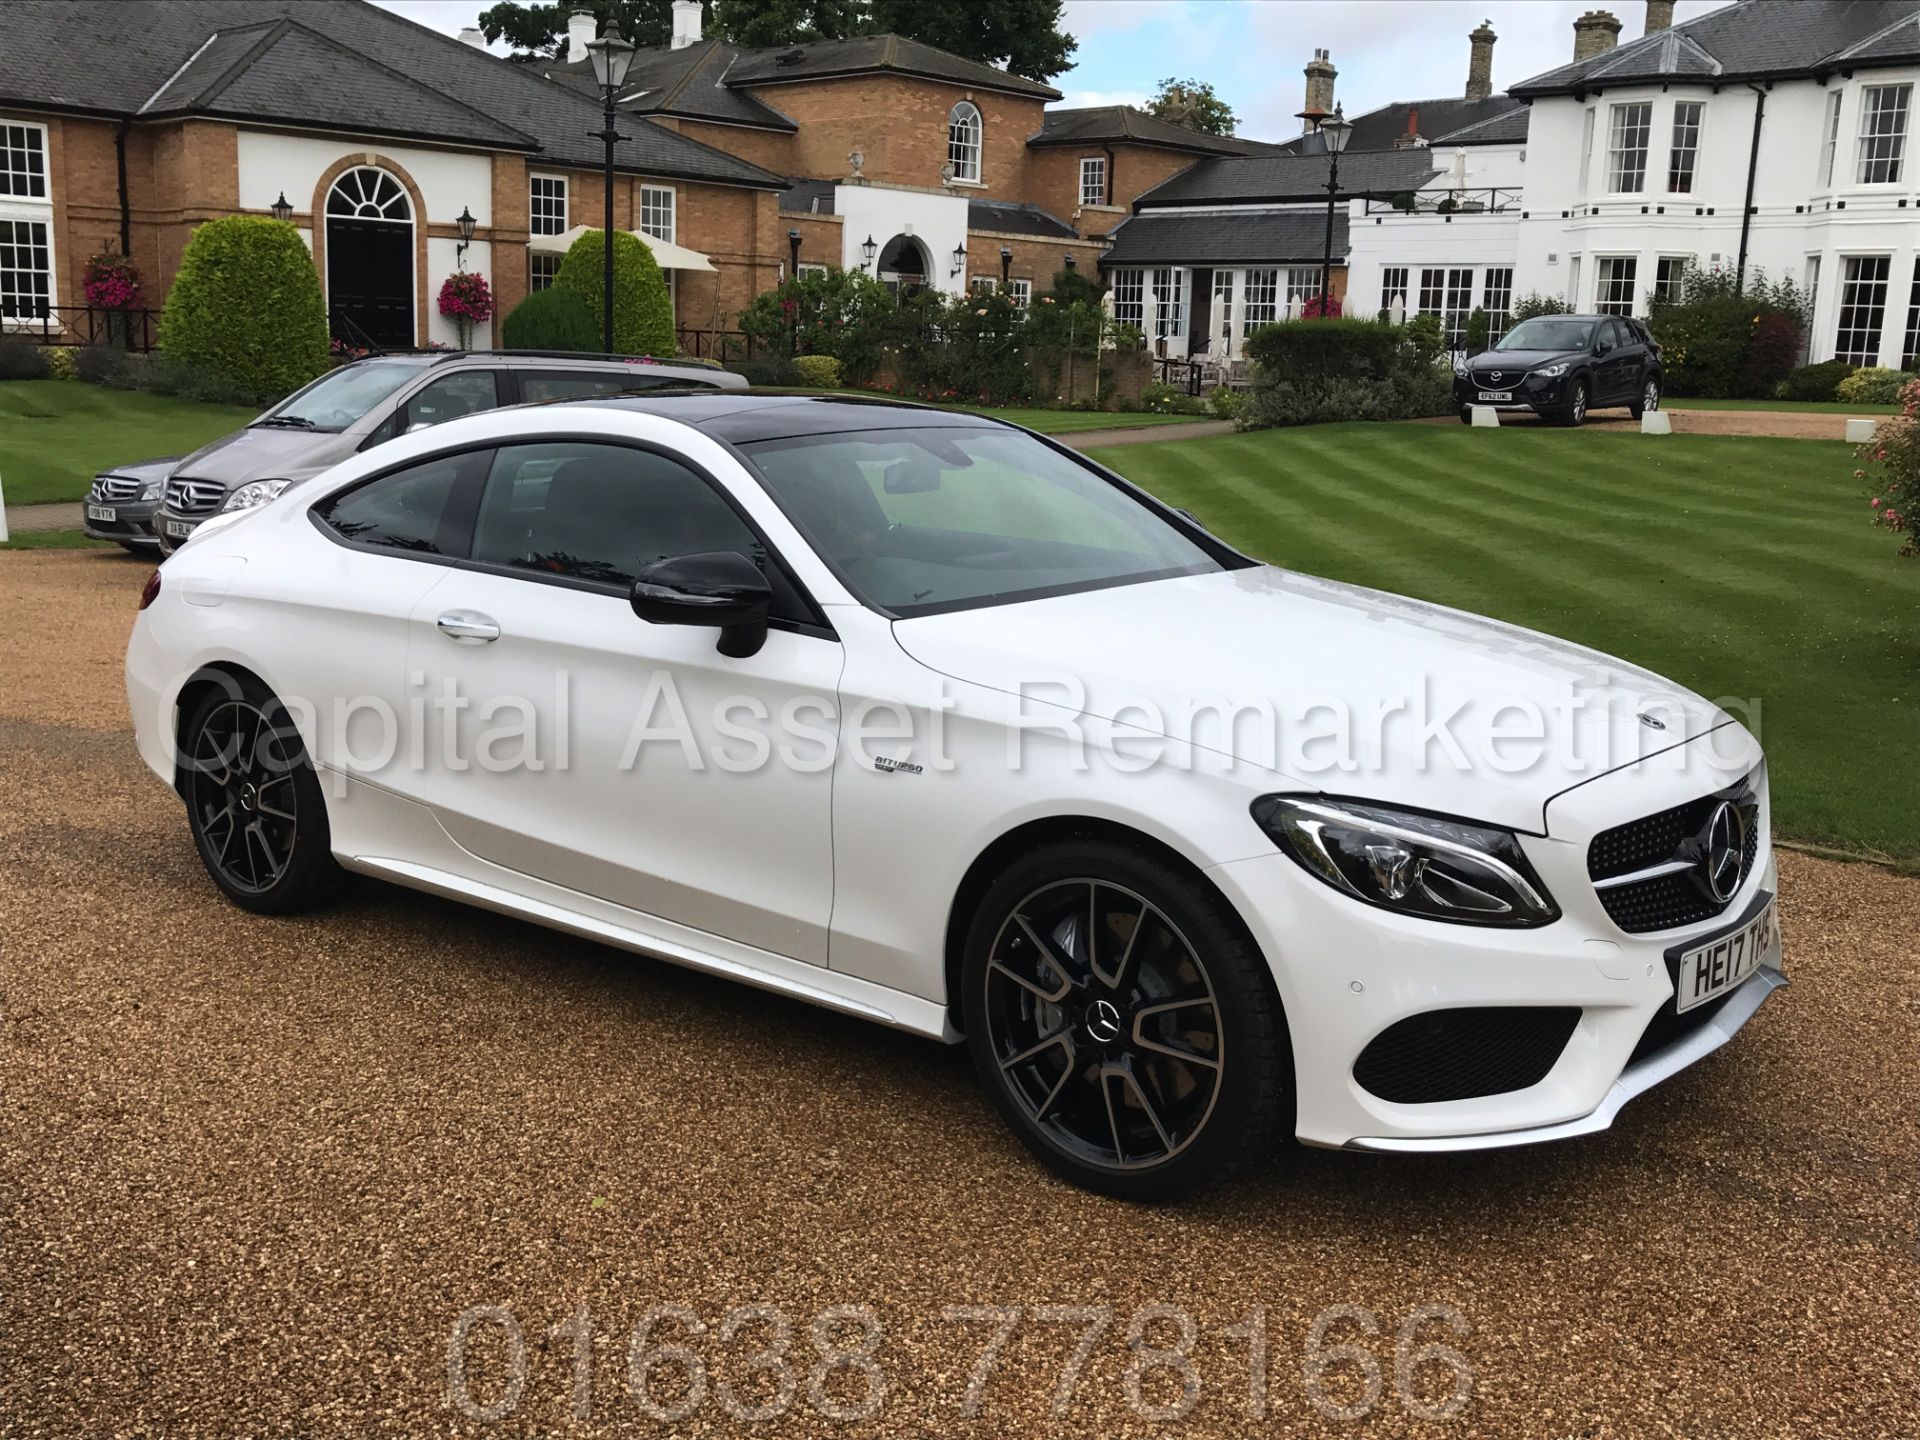 MEREDES-BENZ C43 AMG PREMIUM '4 MATIC' COUPE (2017) '9-G AUTO - LEATHER - SAT NAV' **FULLY LOADED** - Image 18 of 57